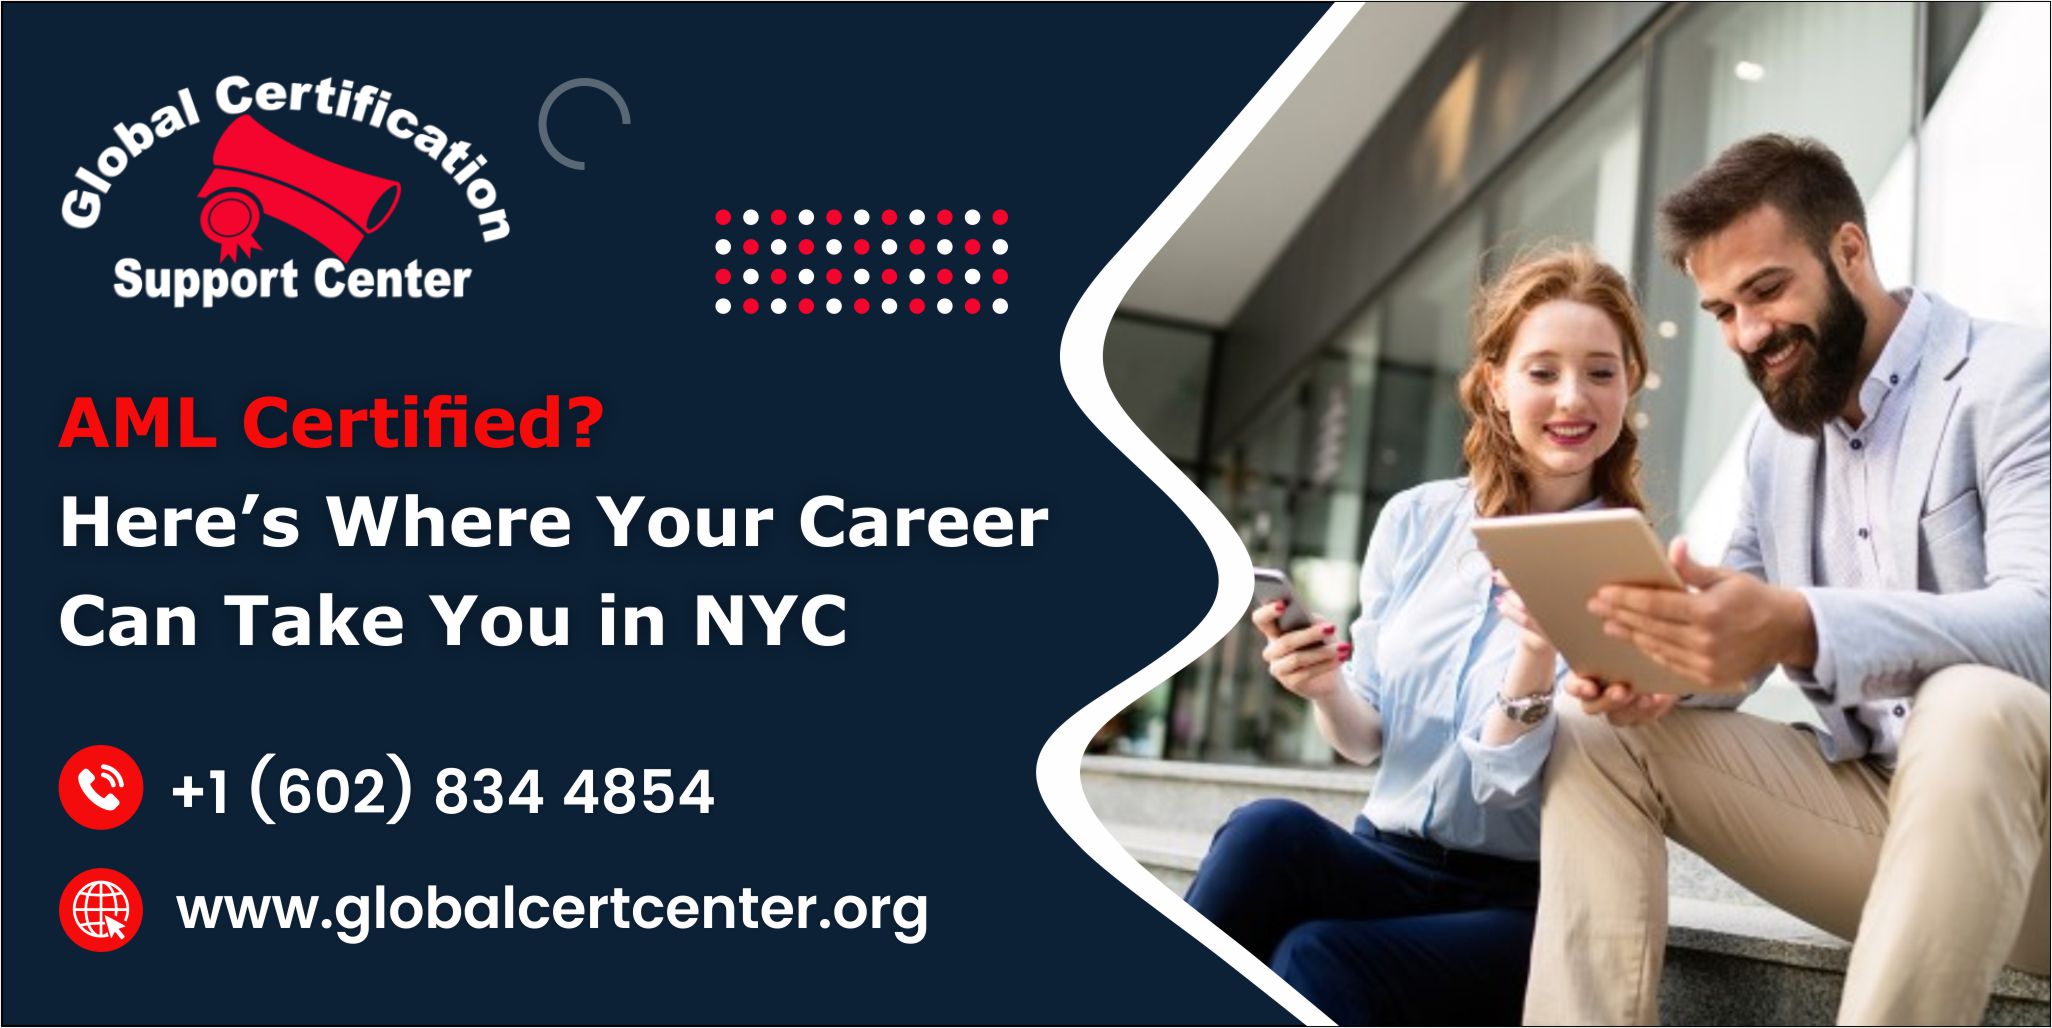 AML Certified? Here’s Where Your Career Can Take You in NYC